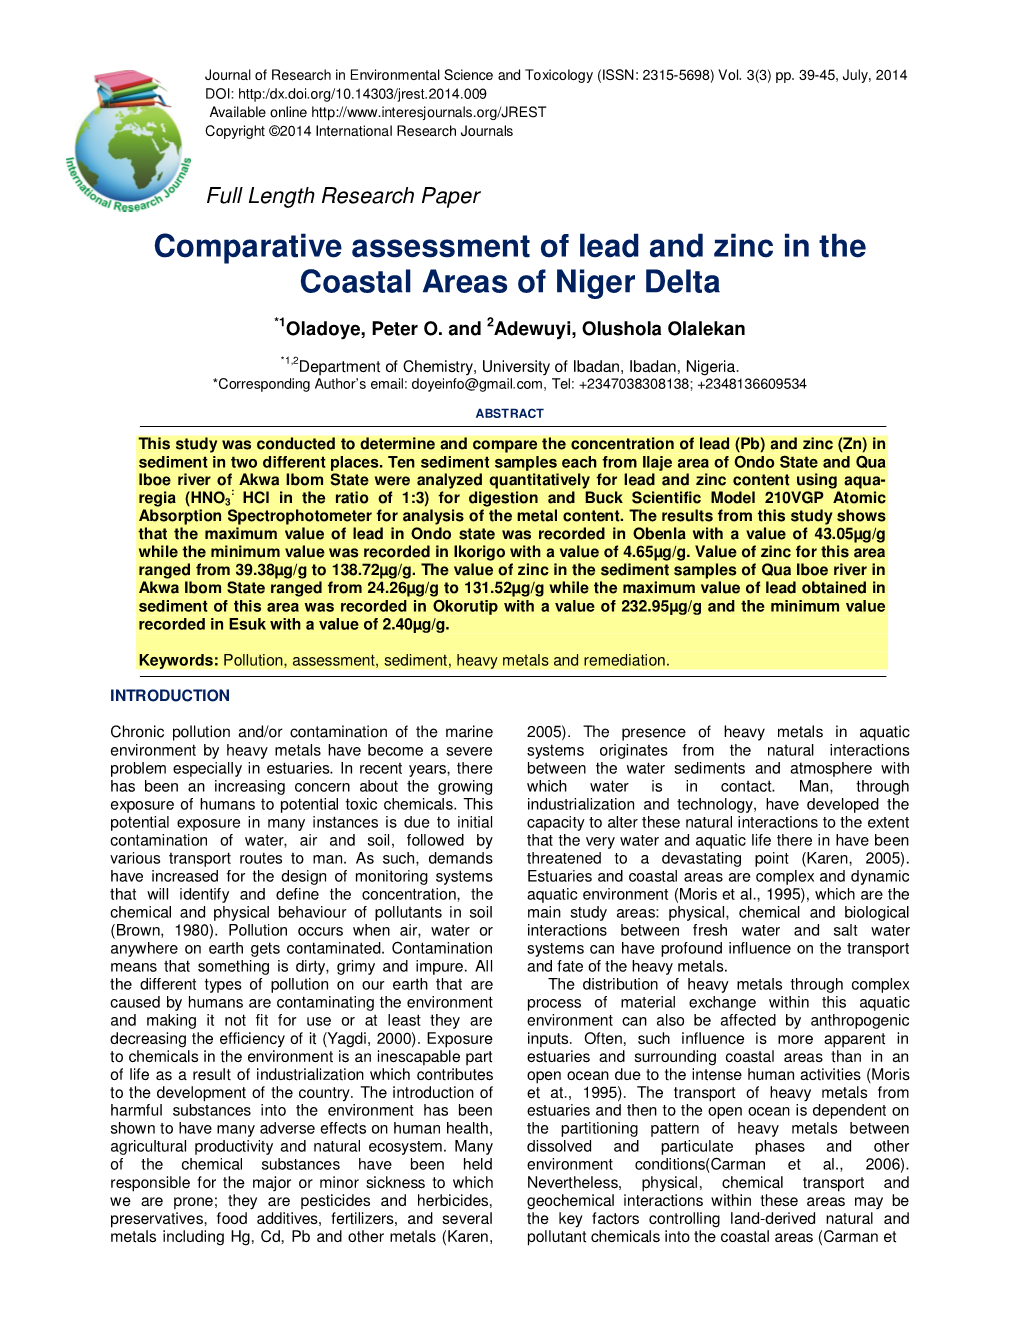 Comparative Assessment of Lead and Zinc in the Coastal Areas of Niger Delta